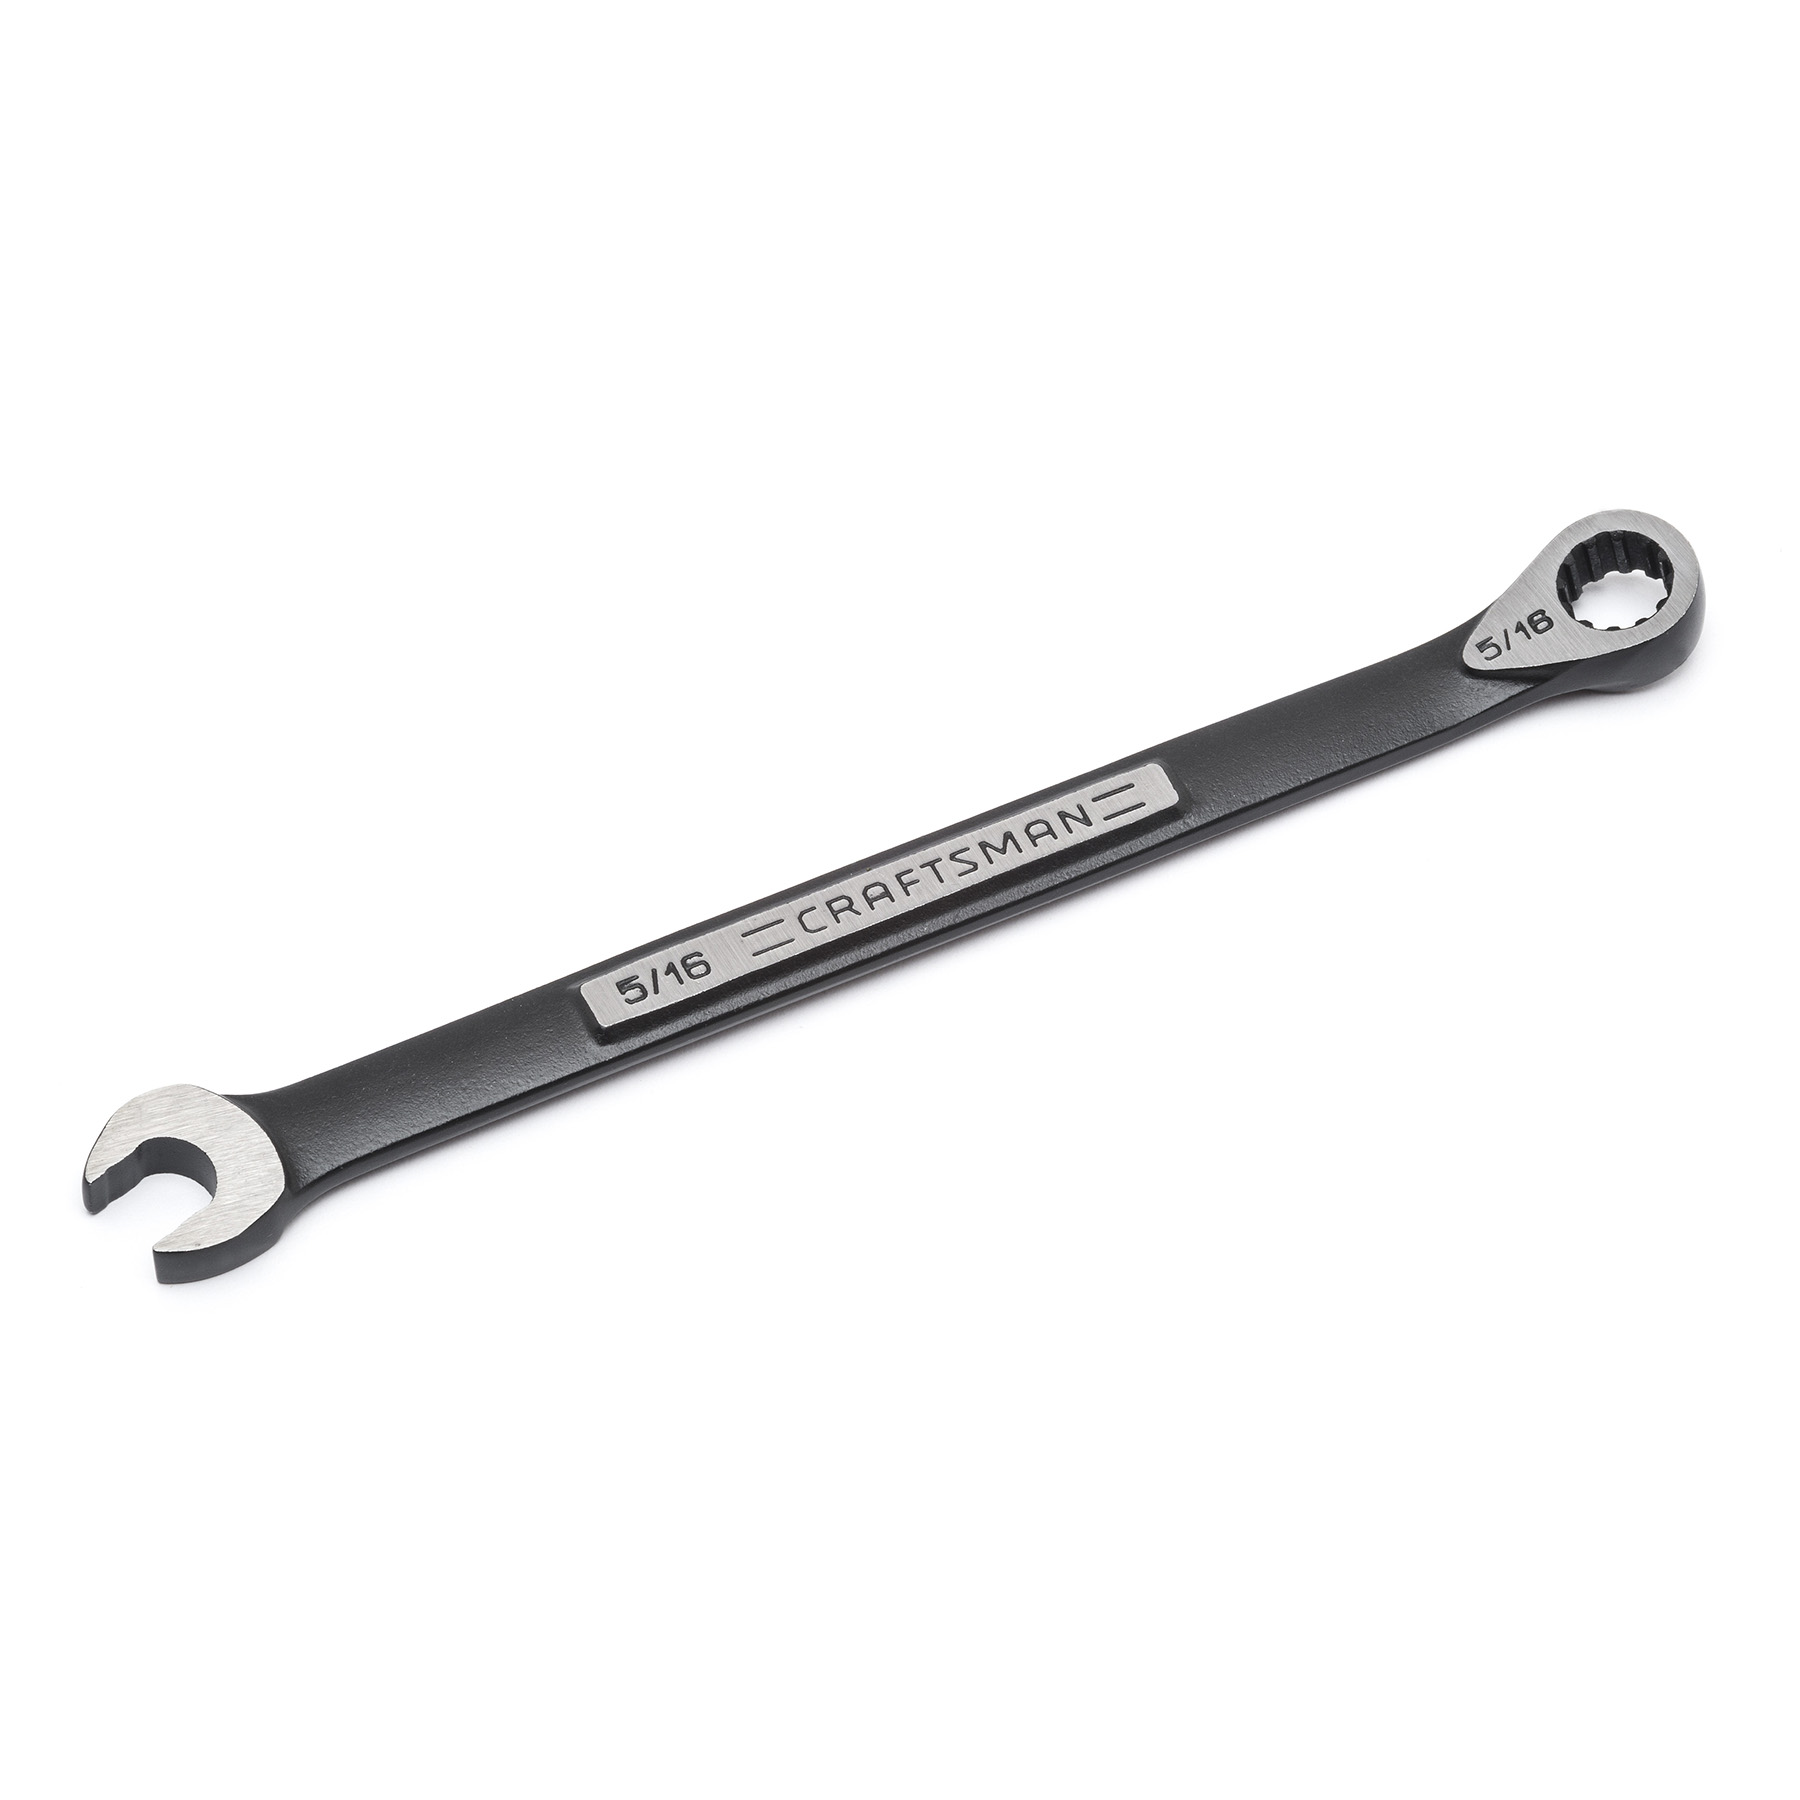 0099575394287 - 5/16IN UNIVERSAL MAX AXESS COMBINATION WRENCH